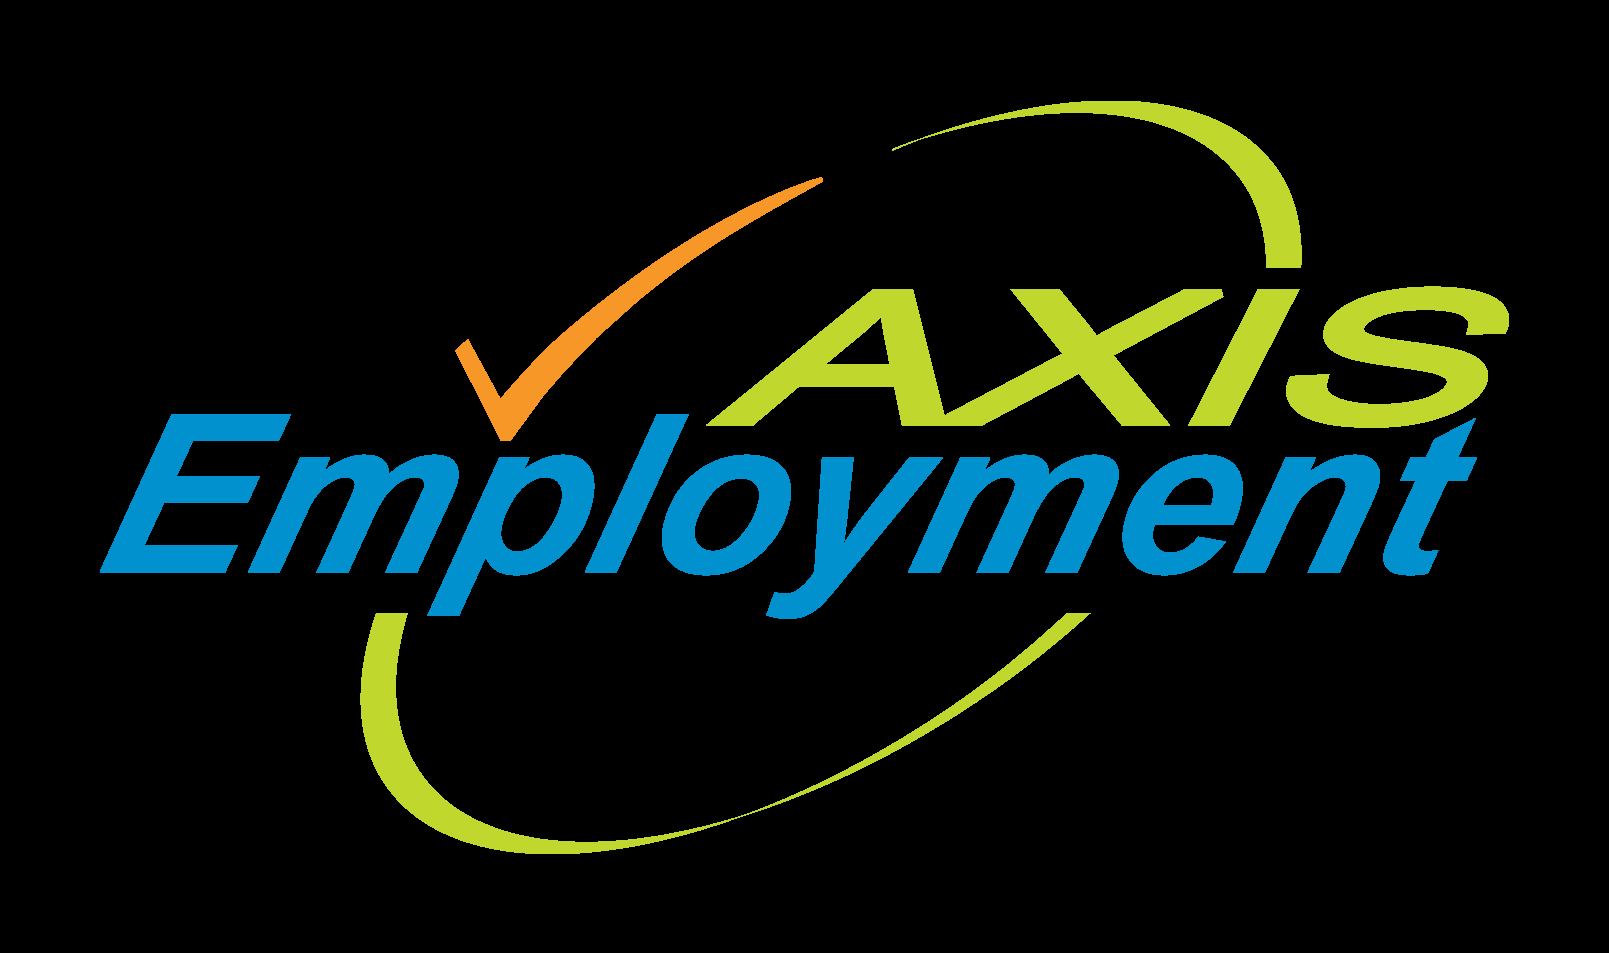 AXIS Employment - Black Background